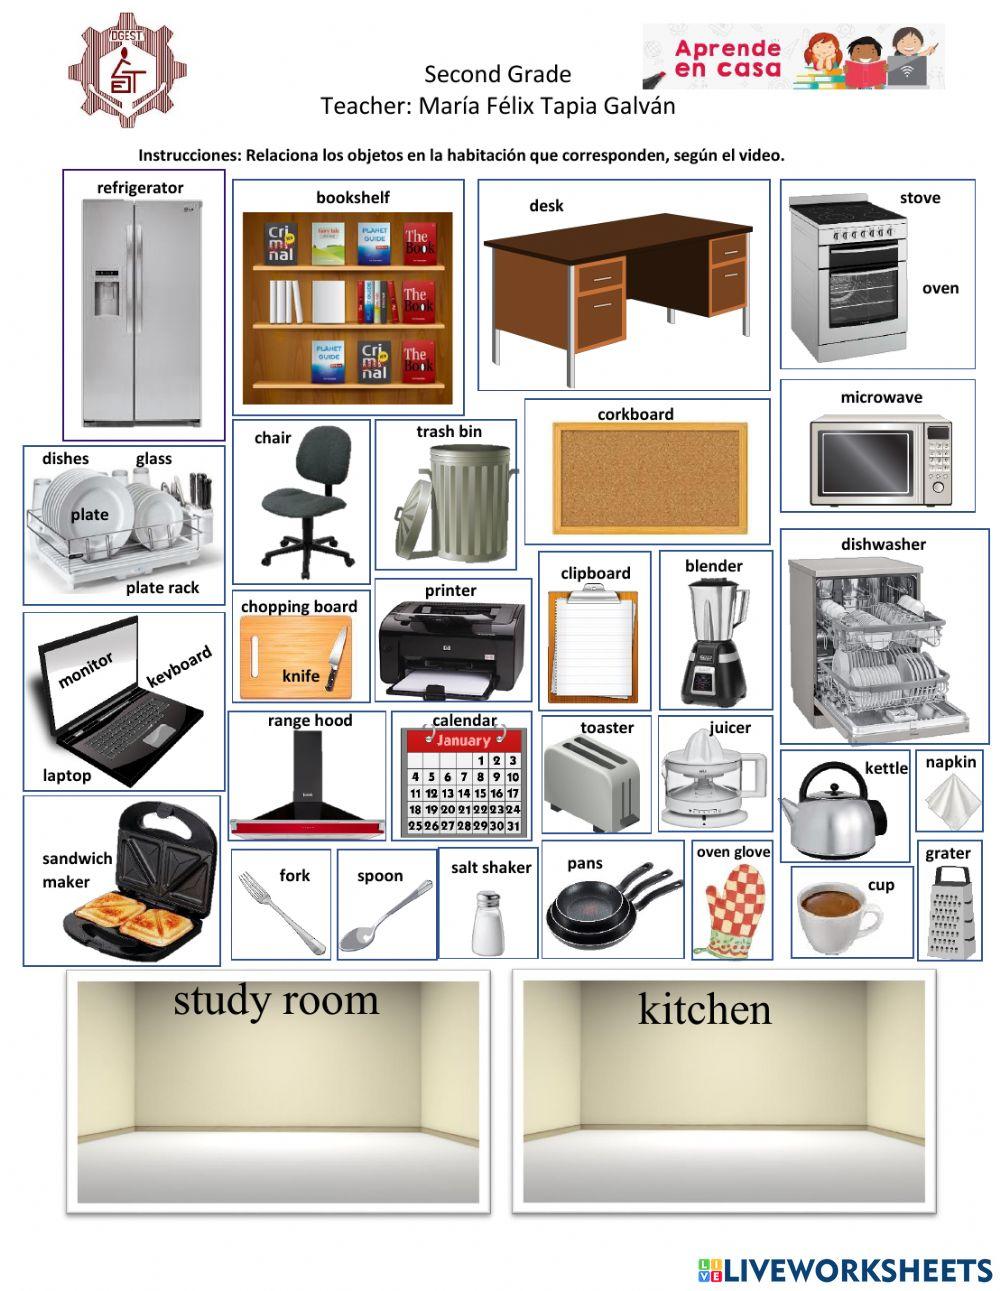 Home objects